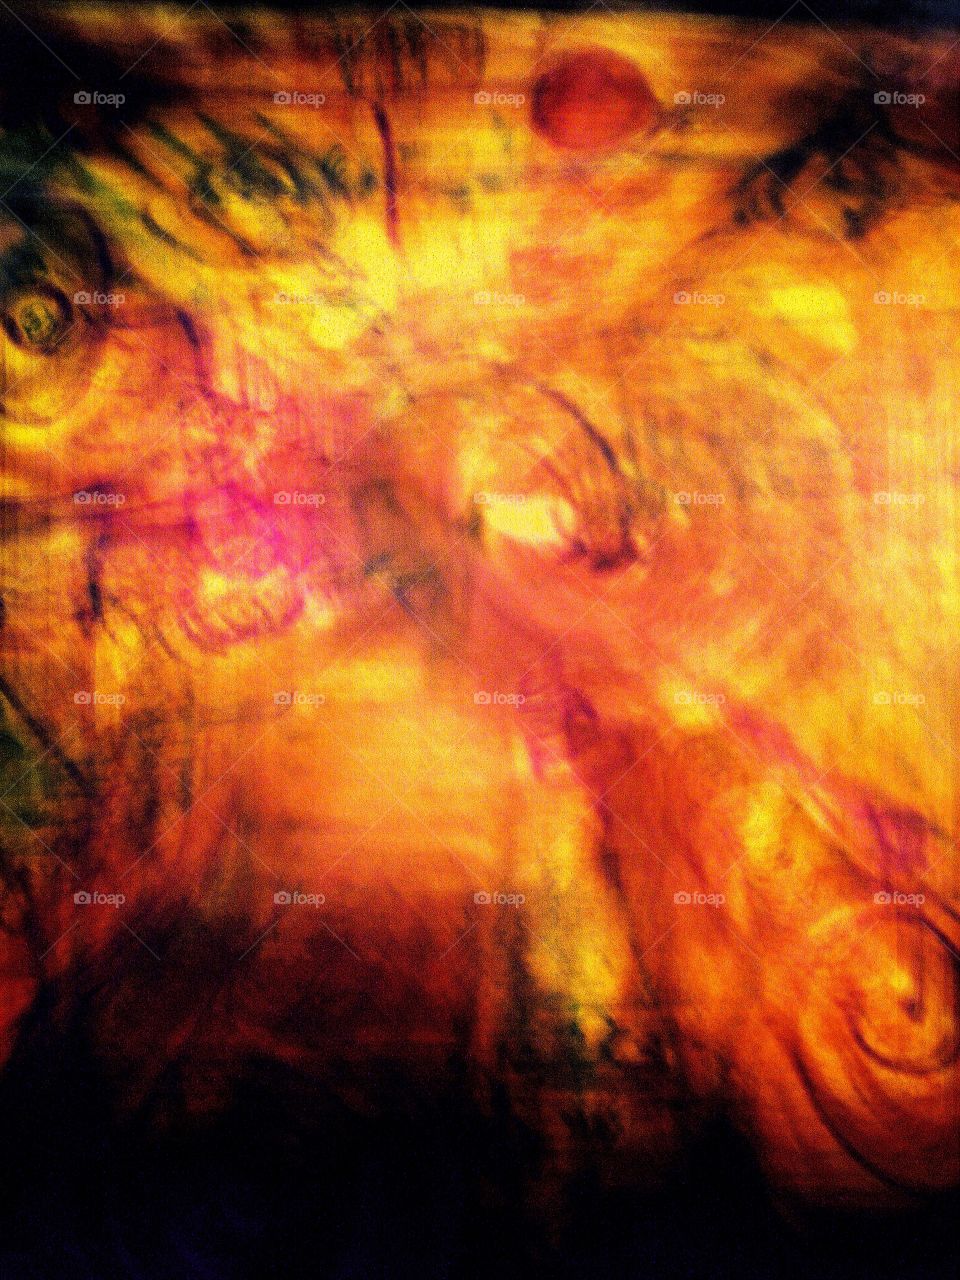 Abstract, Flame, Fantasy, Texture, Art